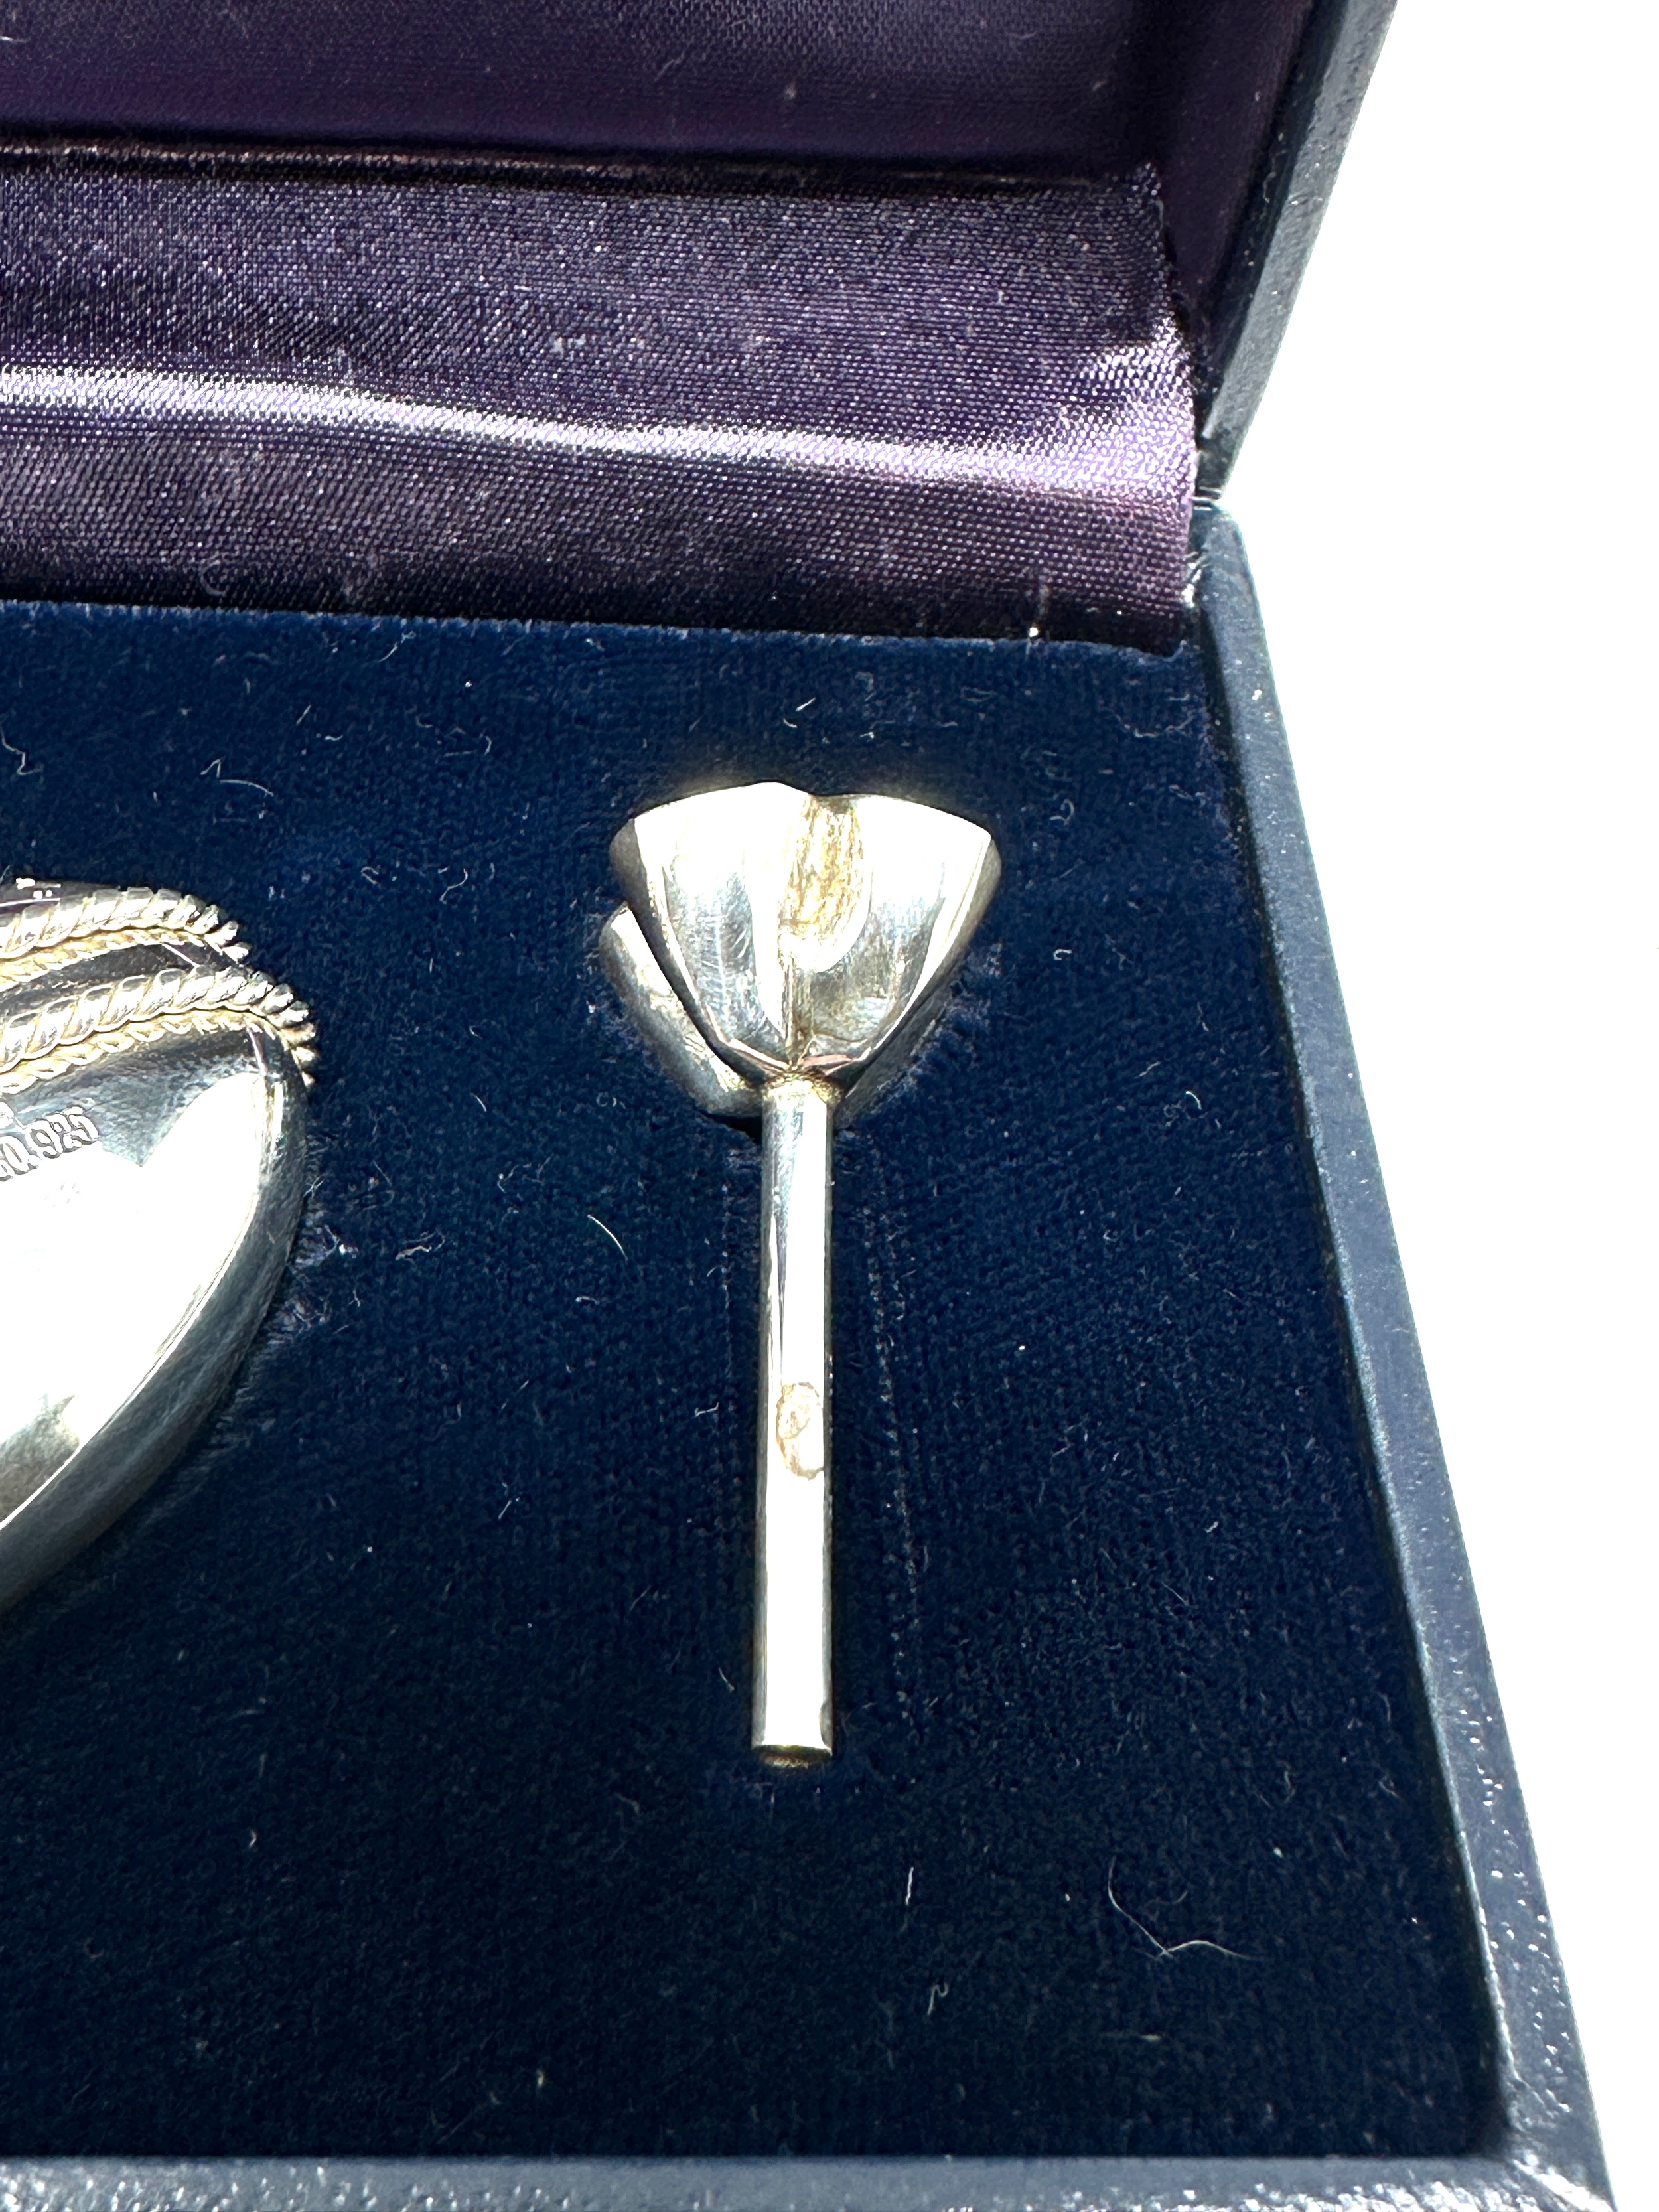 TIFFANY & CO. Stamped .925 Sterling Silver Heart Scent Bottle & filler in boxl Box 24g - Image 3 of 6